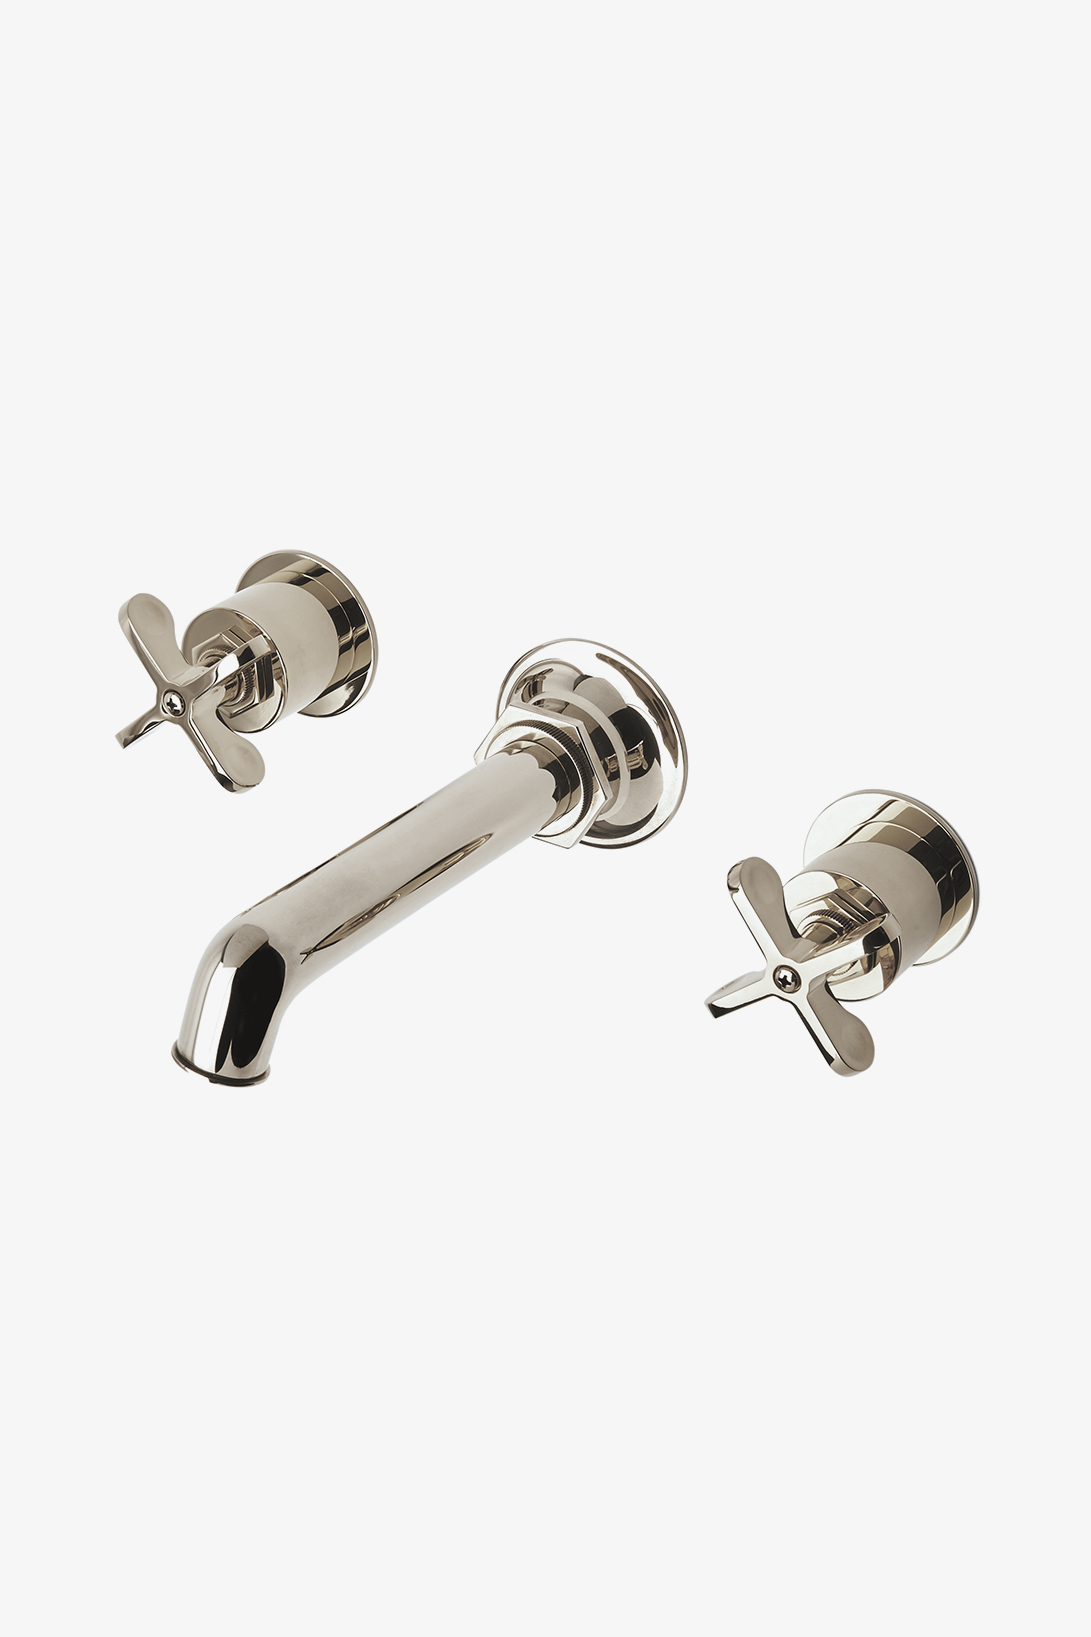 Henry Wall Mounted Lavatory Faucet